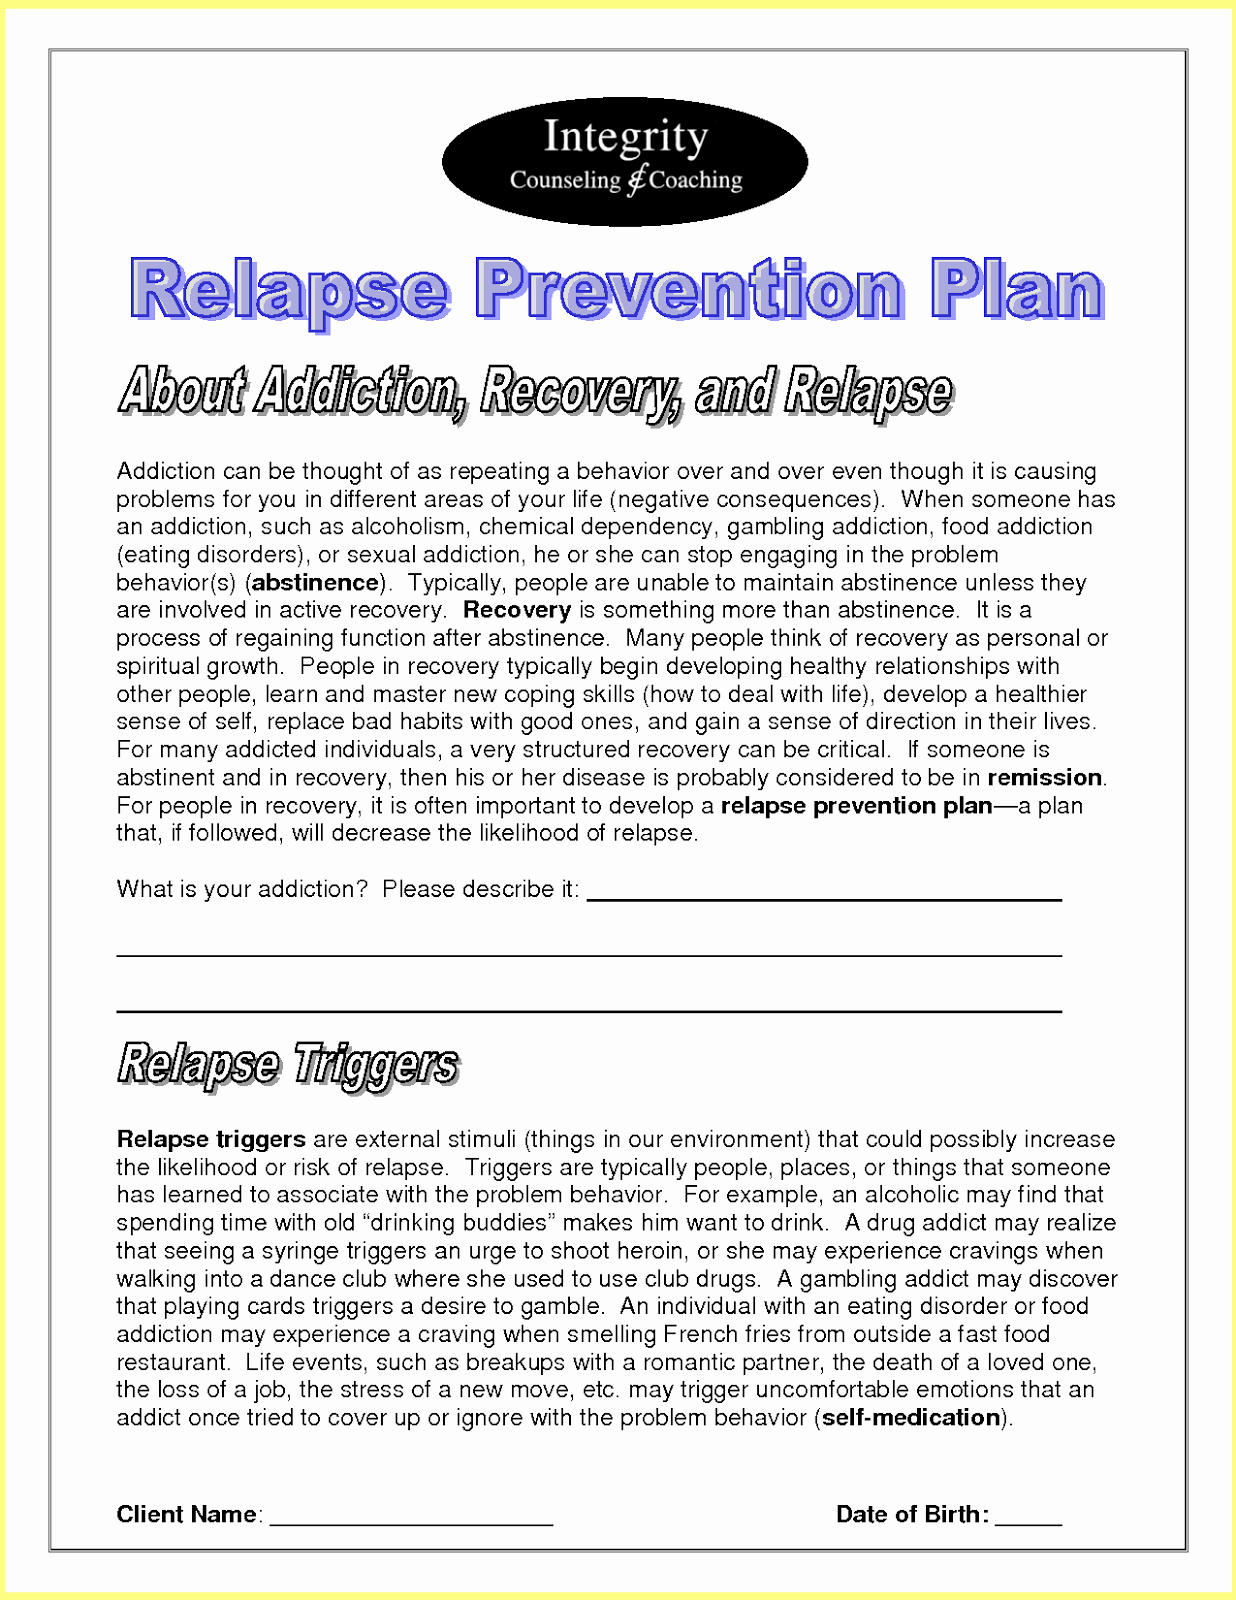 Relapse Prevention Plan Template Pdf Beautiful Relapse Prevention Plan Template